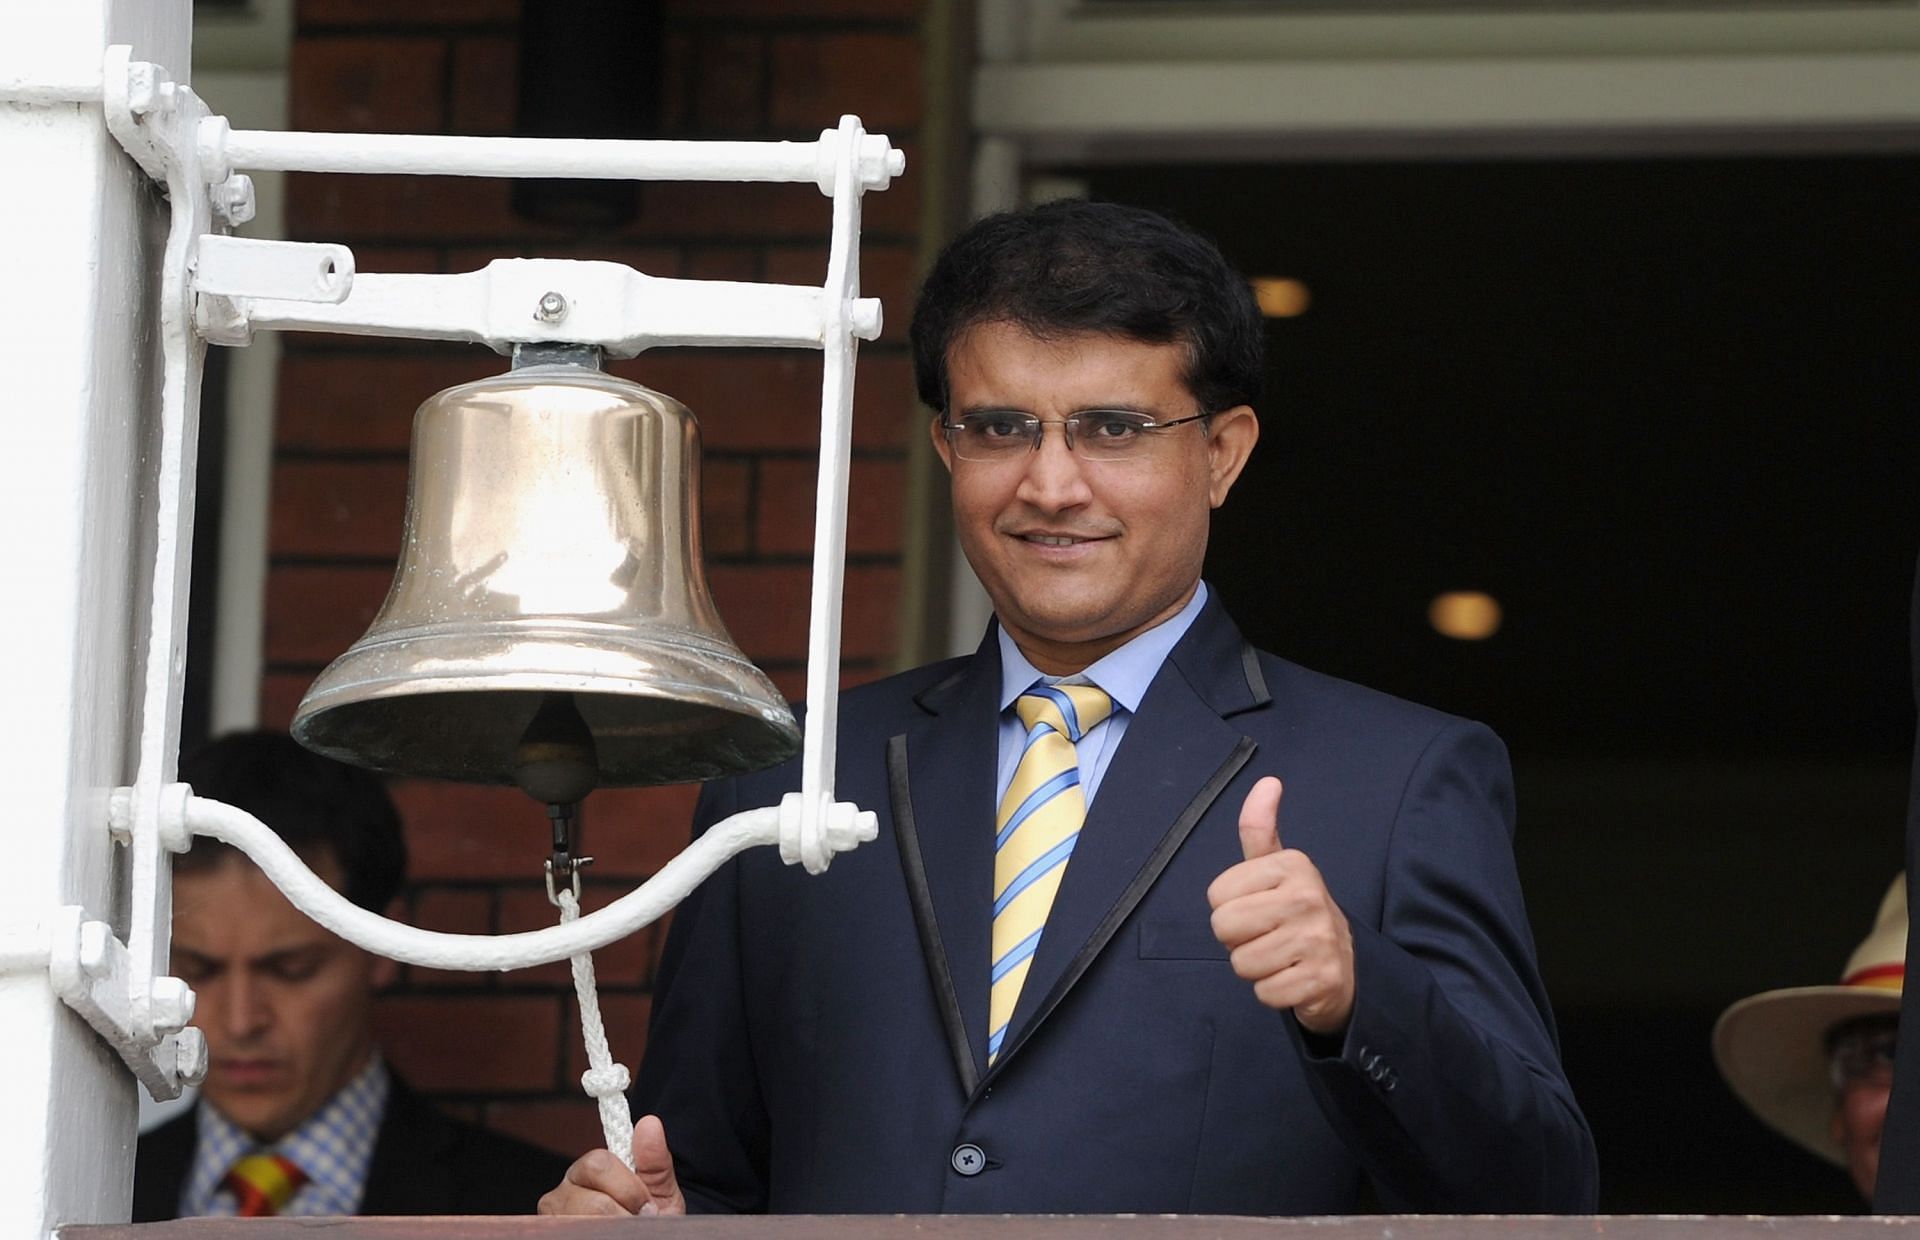 Sourav Ganguly is the BCCI President at the moment (Image: Getty)